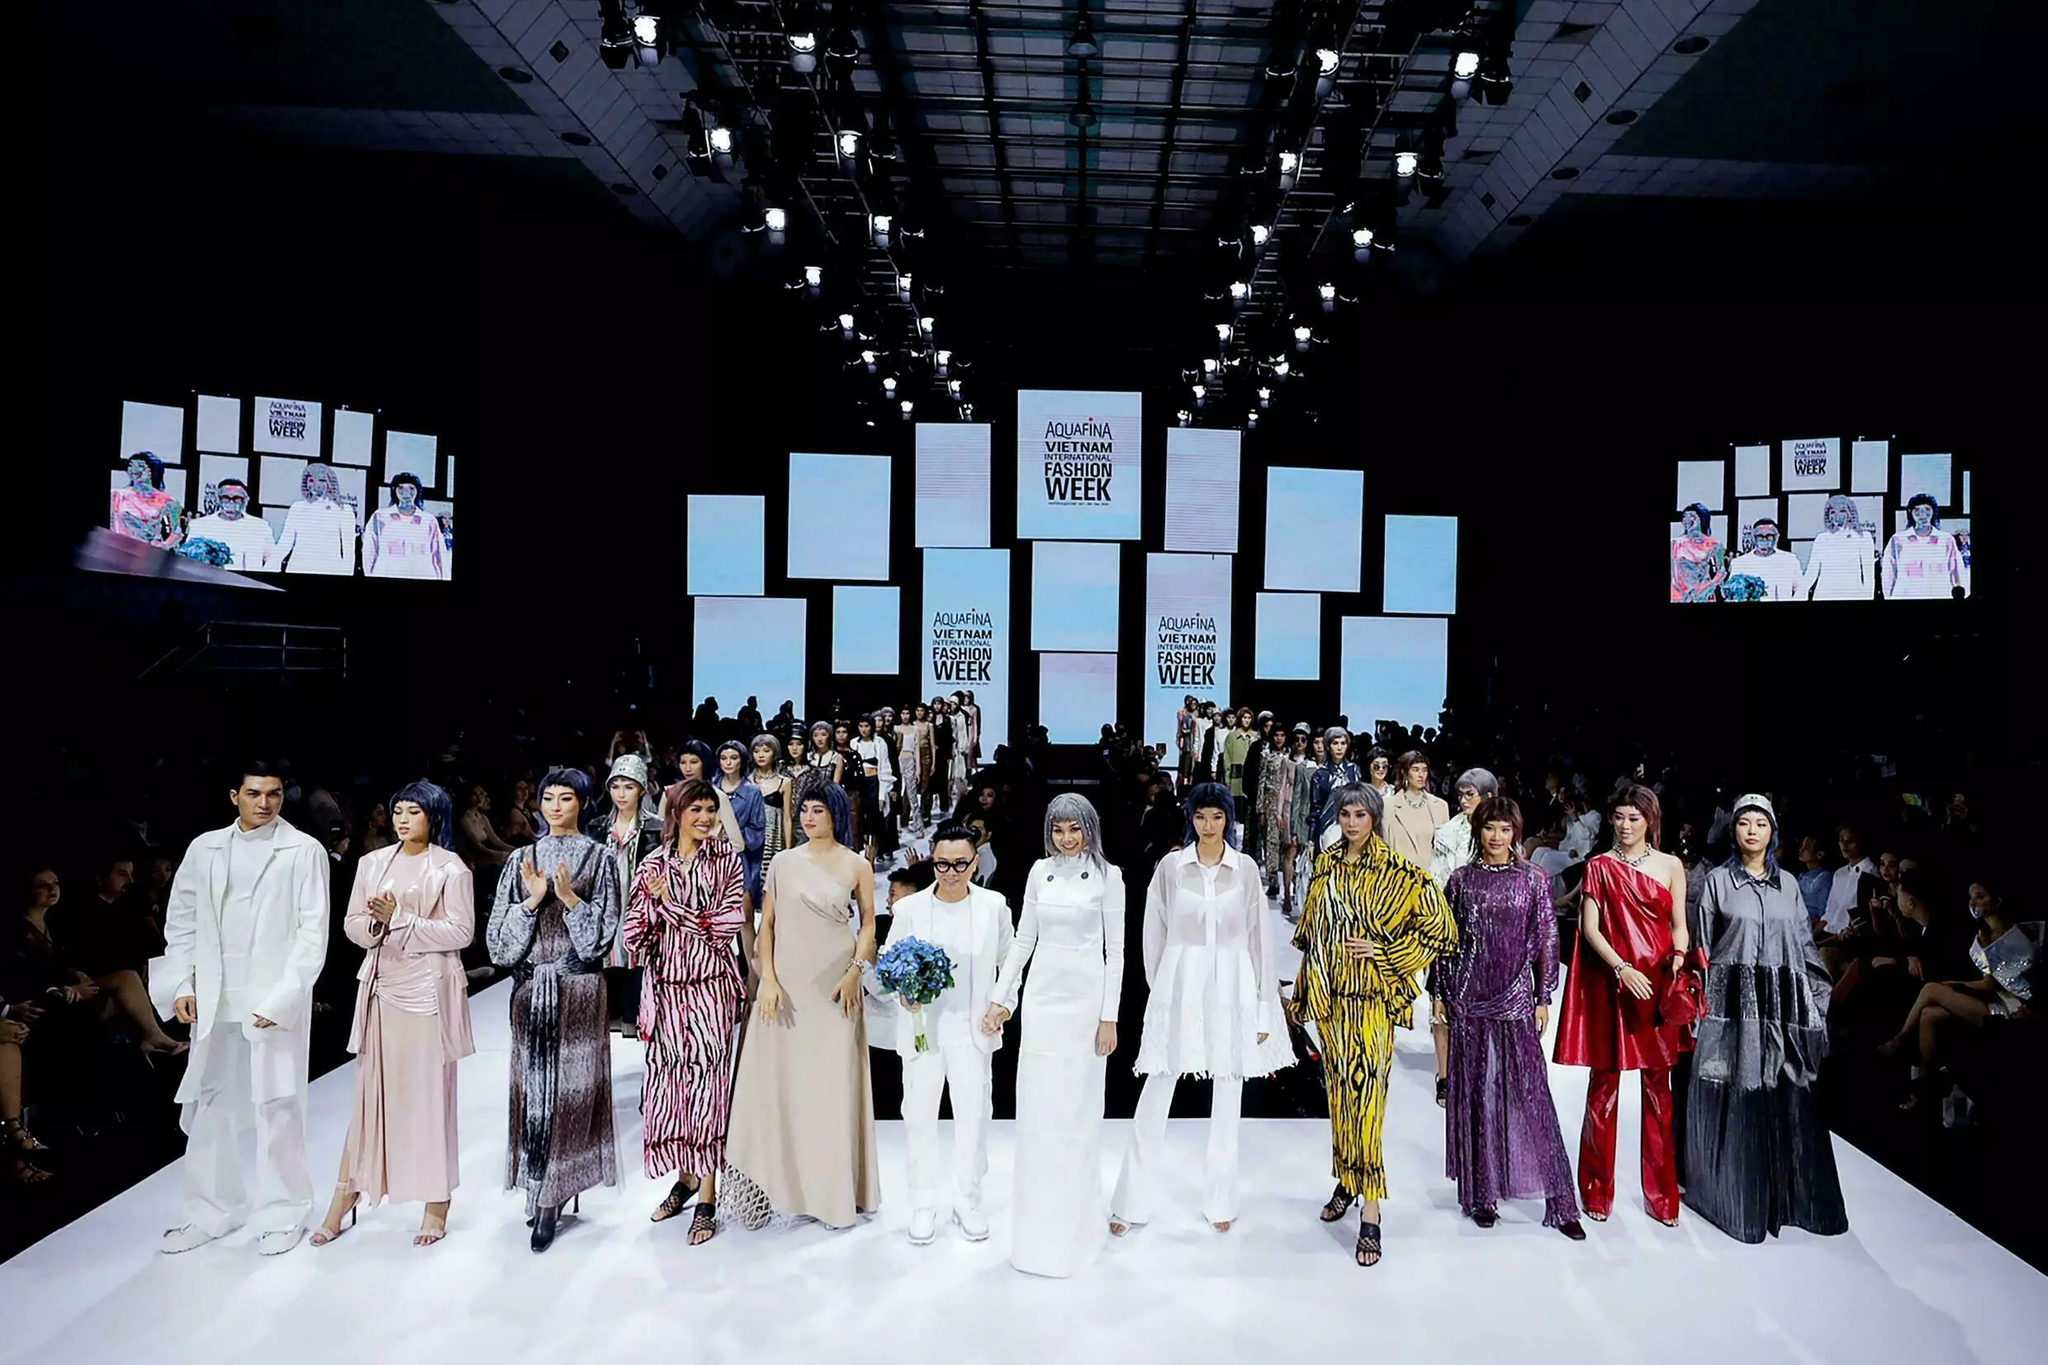 While the nation's textile factories have hit the headlines this year over struggles to fulfill orders for global clothing giants such as Nike and Gap amid a brutal COVID-19 wave, young designers are ready to reclaim the Made in Vietnam label. Photo: Courtesy of Cong Tri/AFP